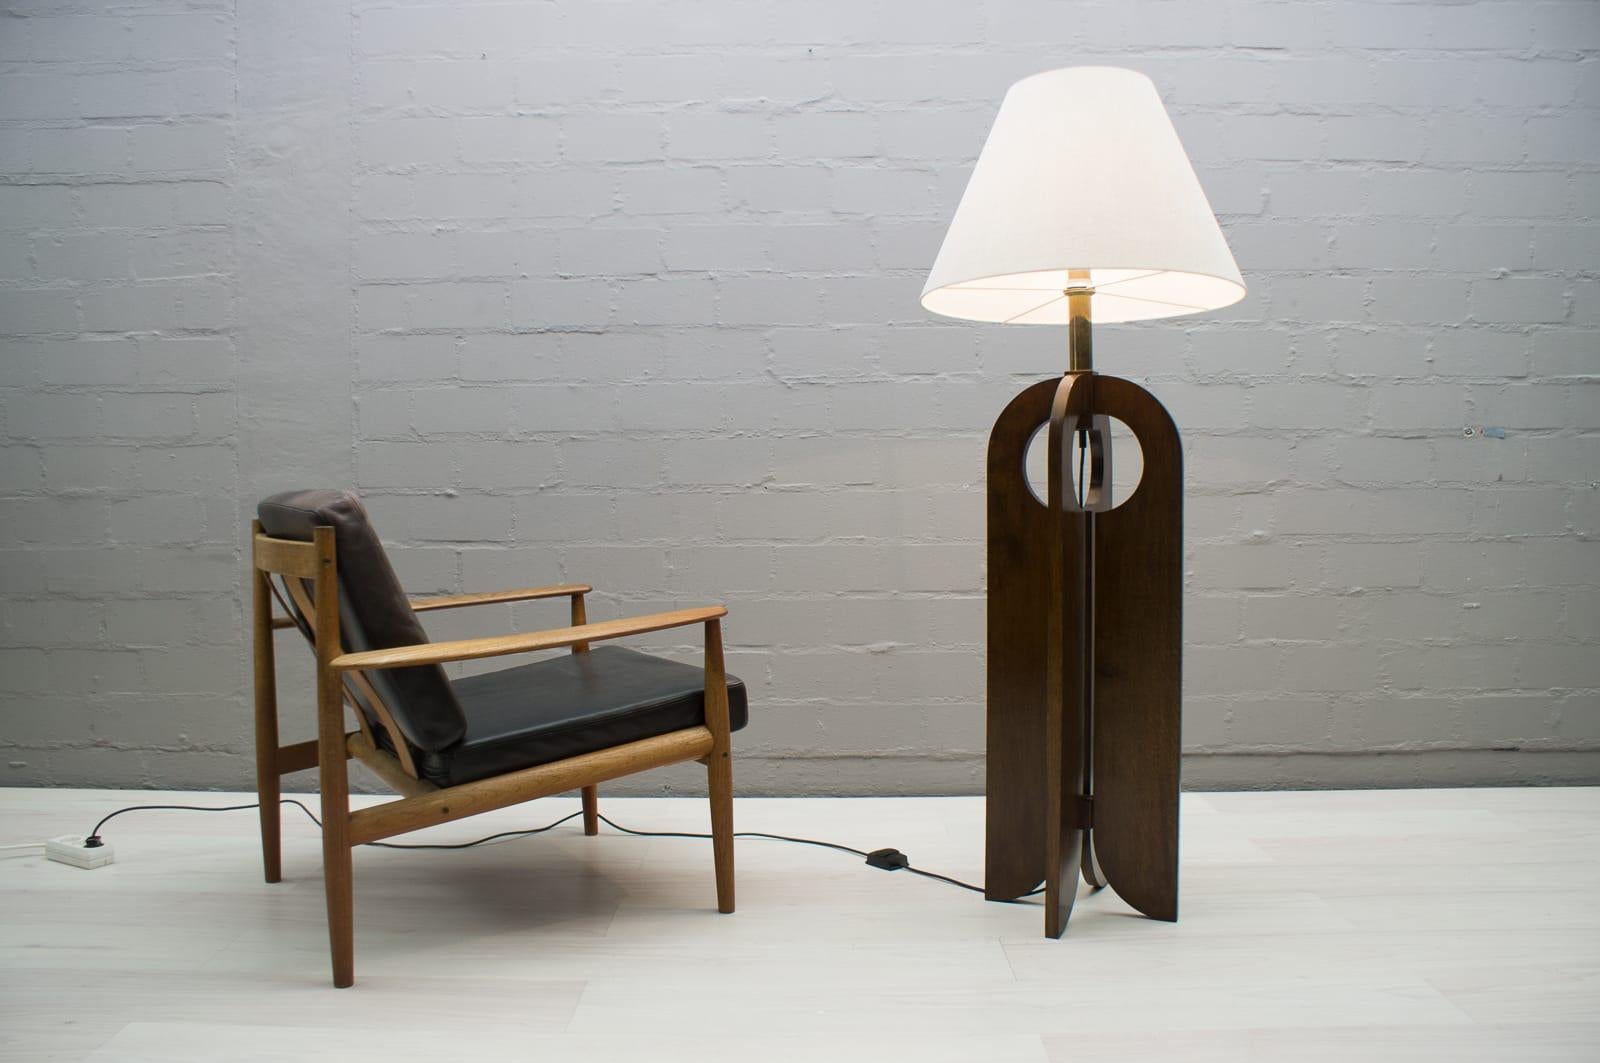 Space Age Large Wooden Floor Lamp Temde Attributed, 1960s Switzerland For Sale